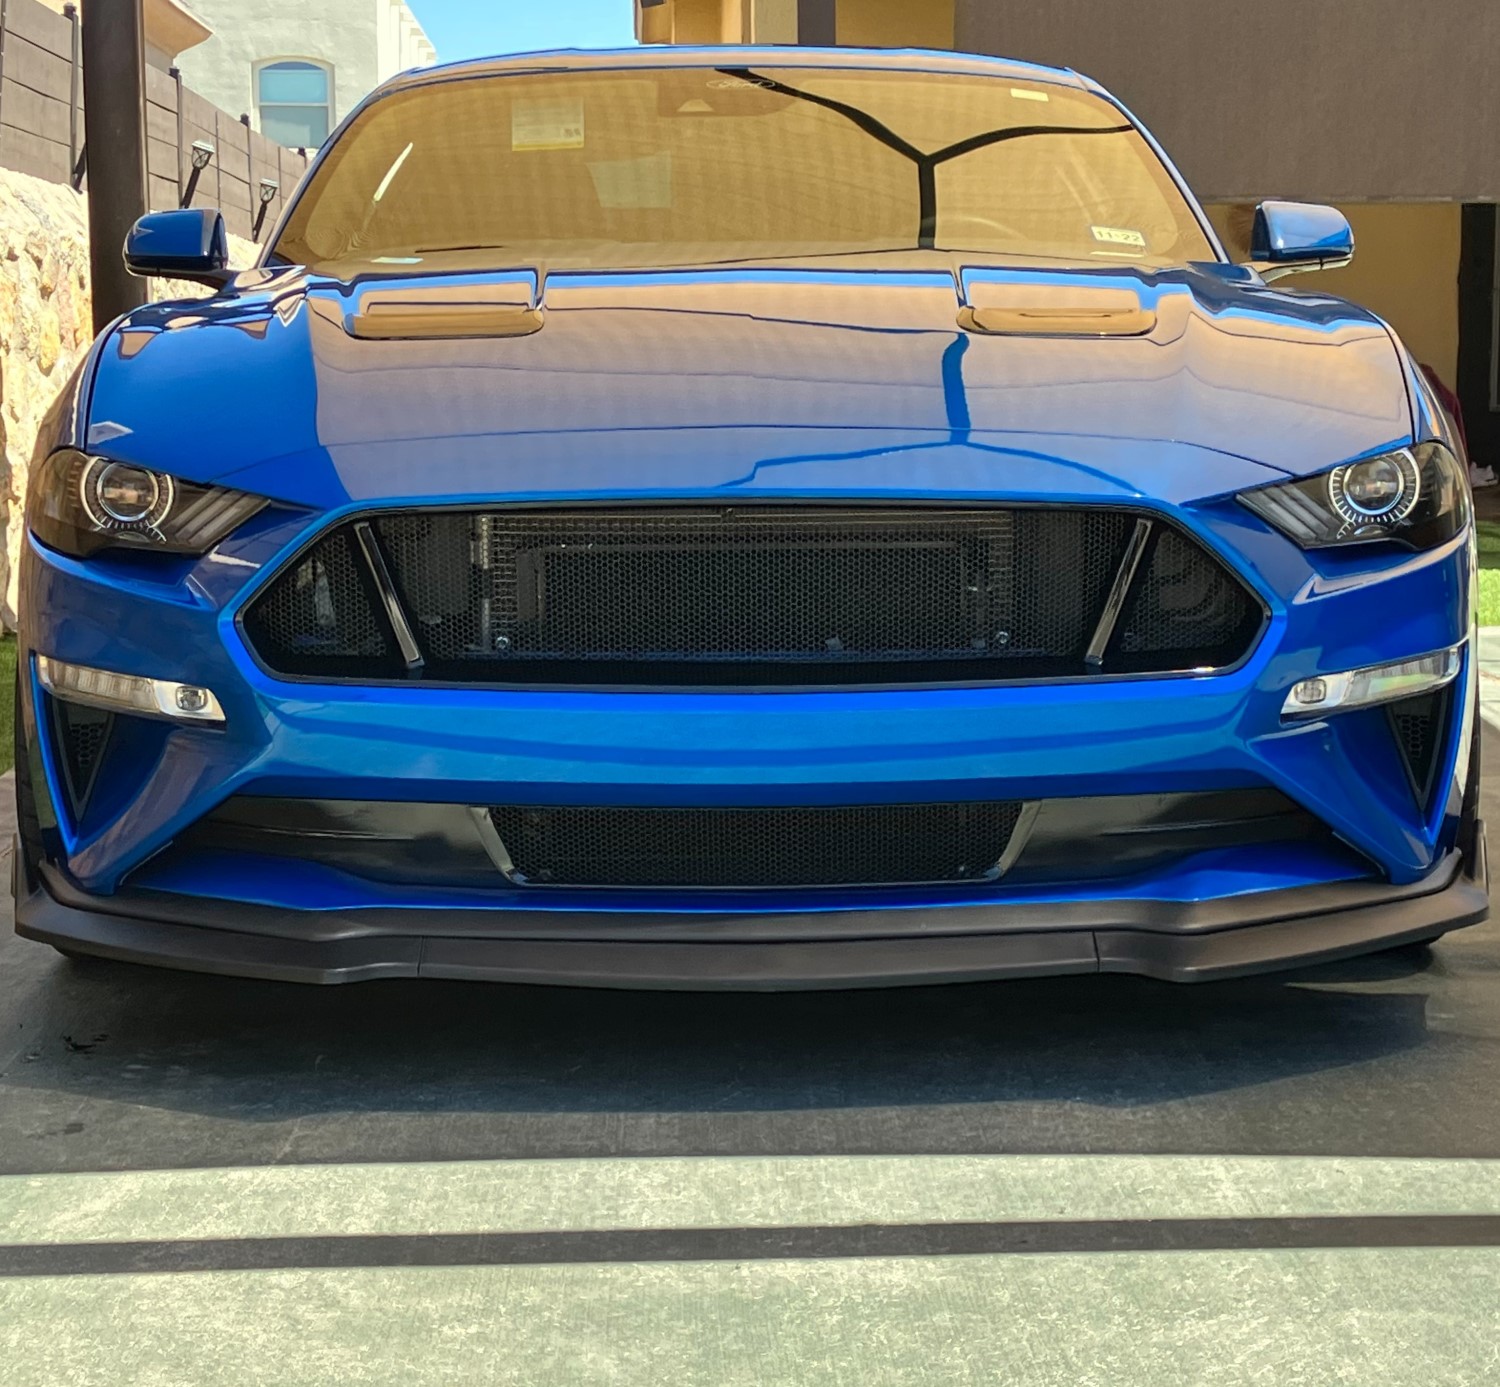 Aggressive Style: Custom Black Grille Upgrade for Blue 6th Gen 